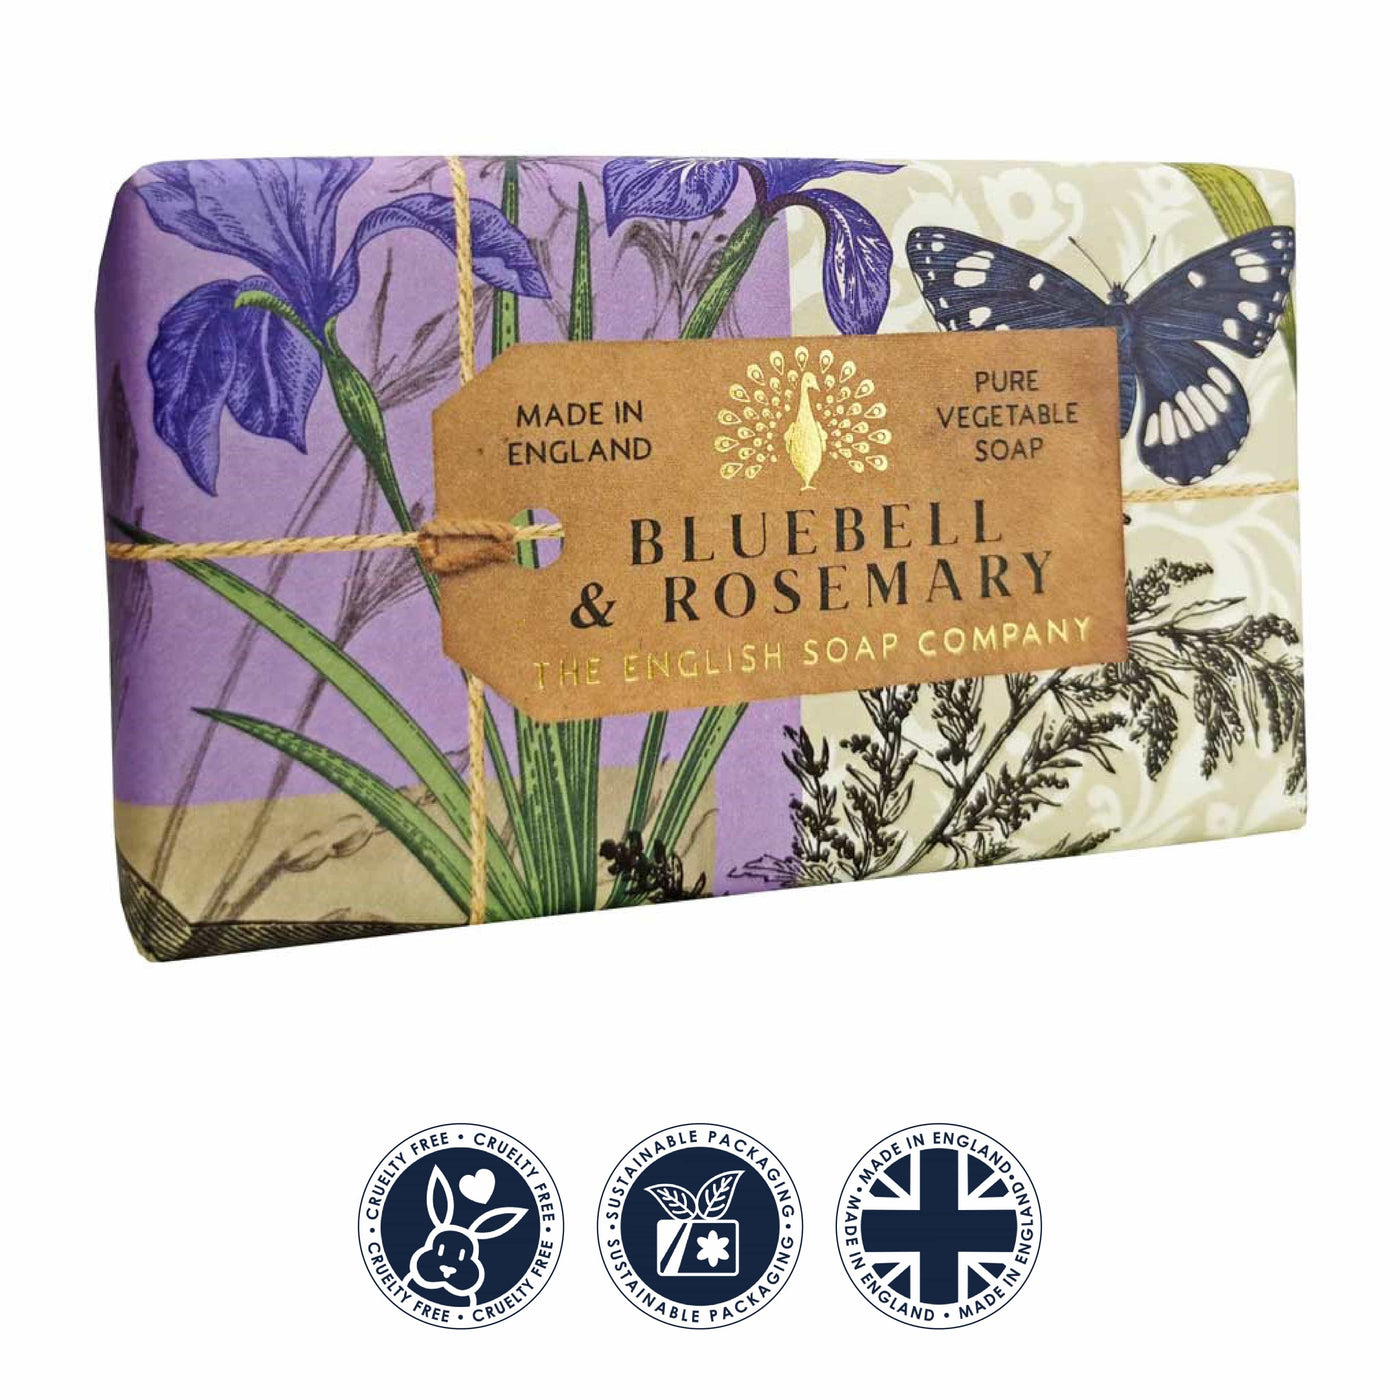 Anniversary Bluebell and Rosemary Soap Bar from our Luxury Bar Soap collection by The English Soap Company